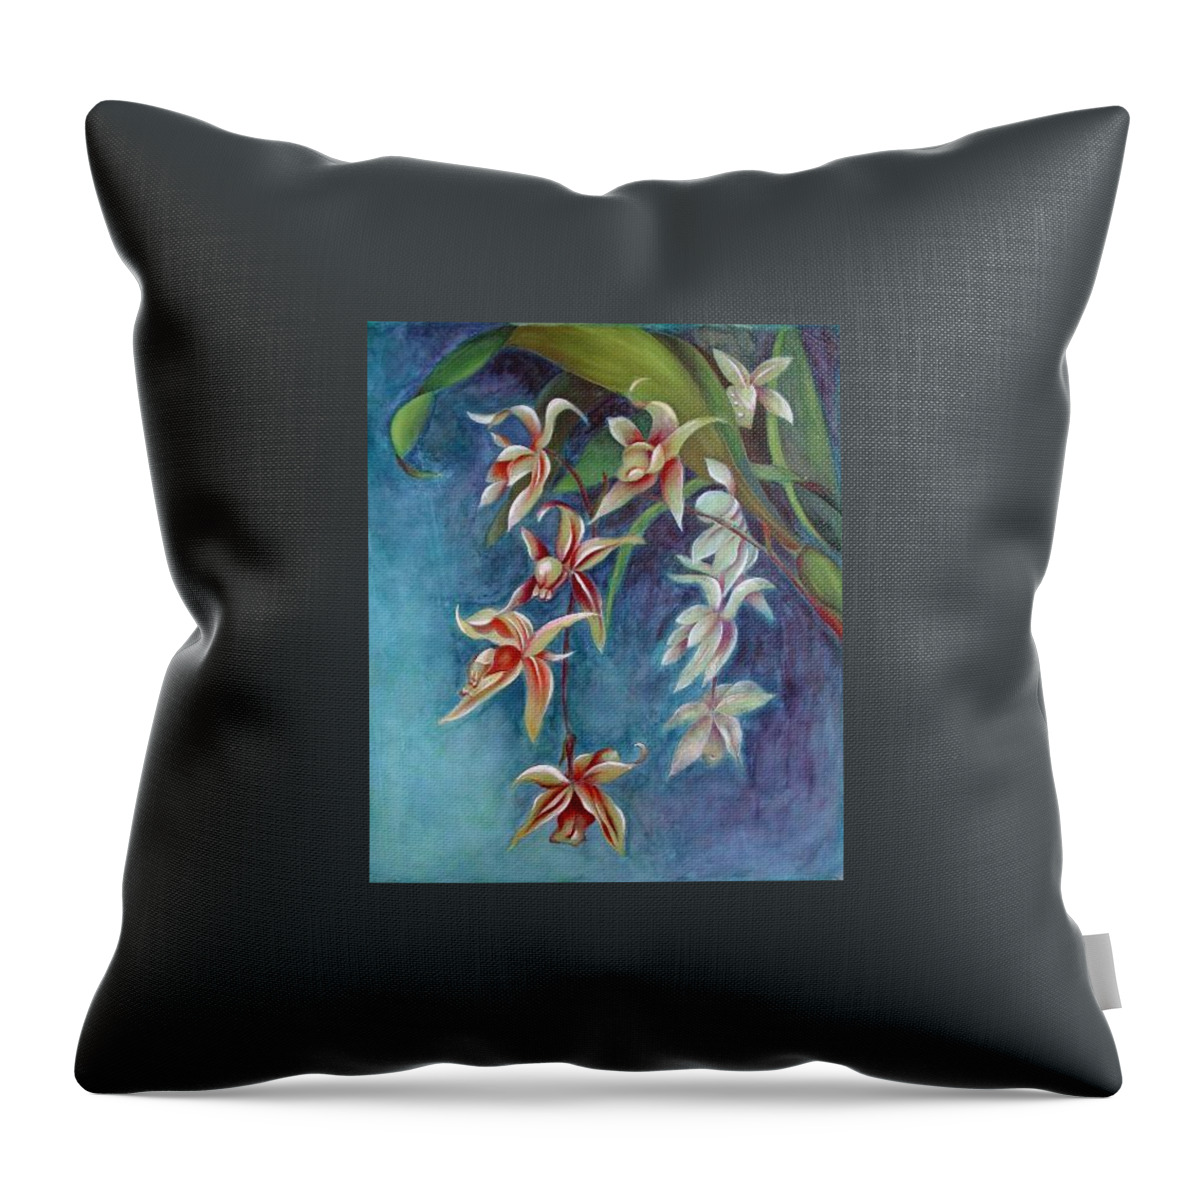 Orchids Throw Pillow featuring the painting Evening Orchids by Vina Yang